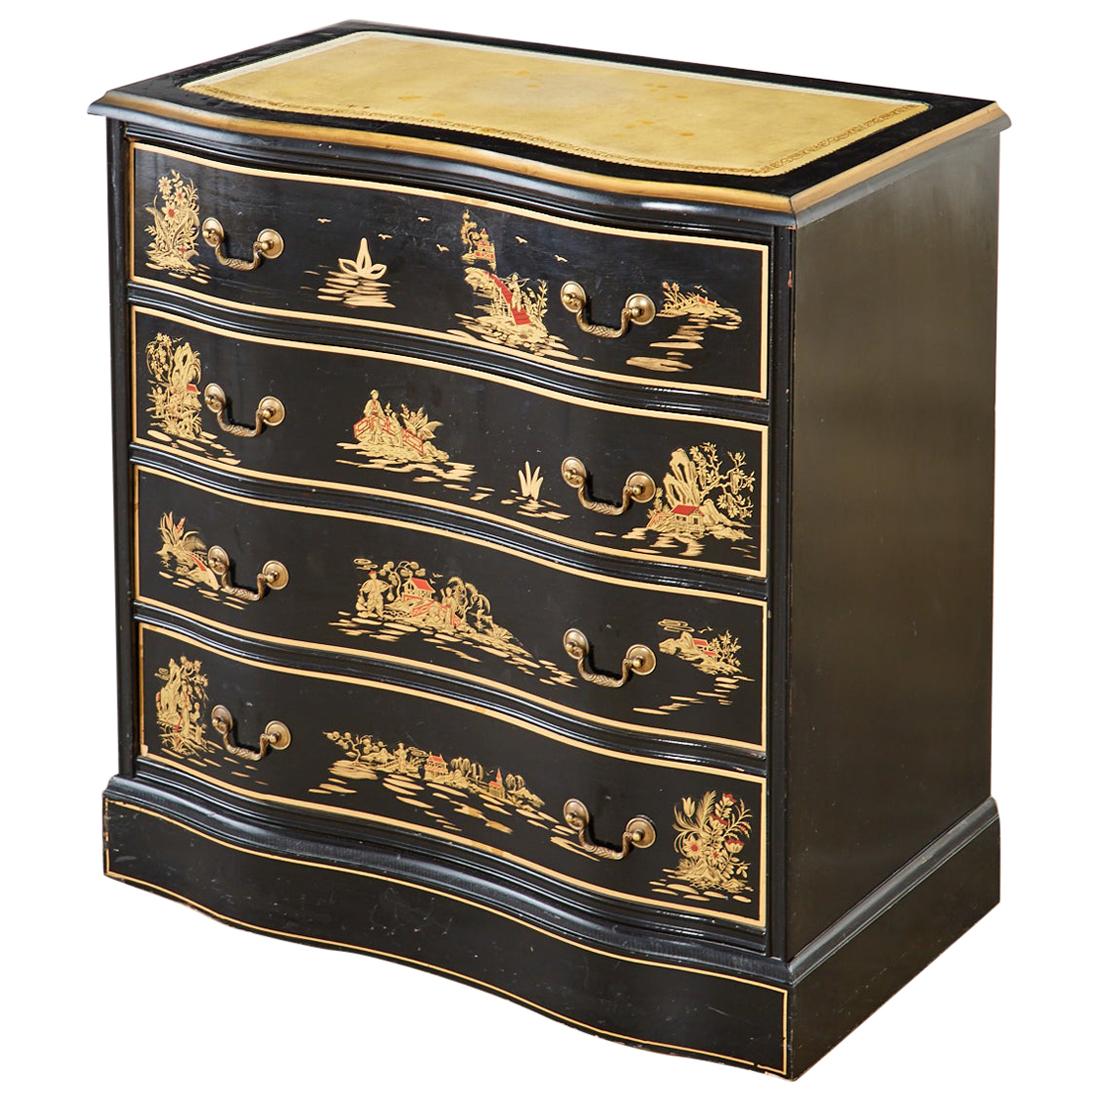 English Regency Style Chinoiserie Decorated Commode or Chest